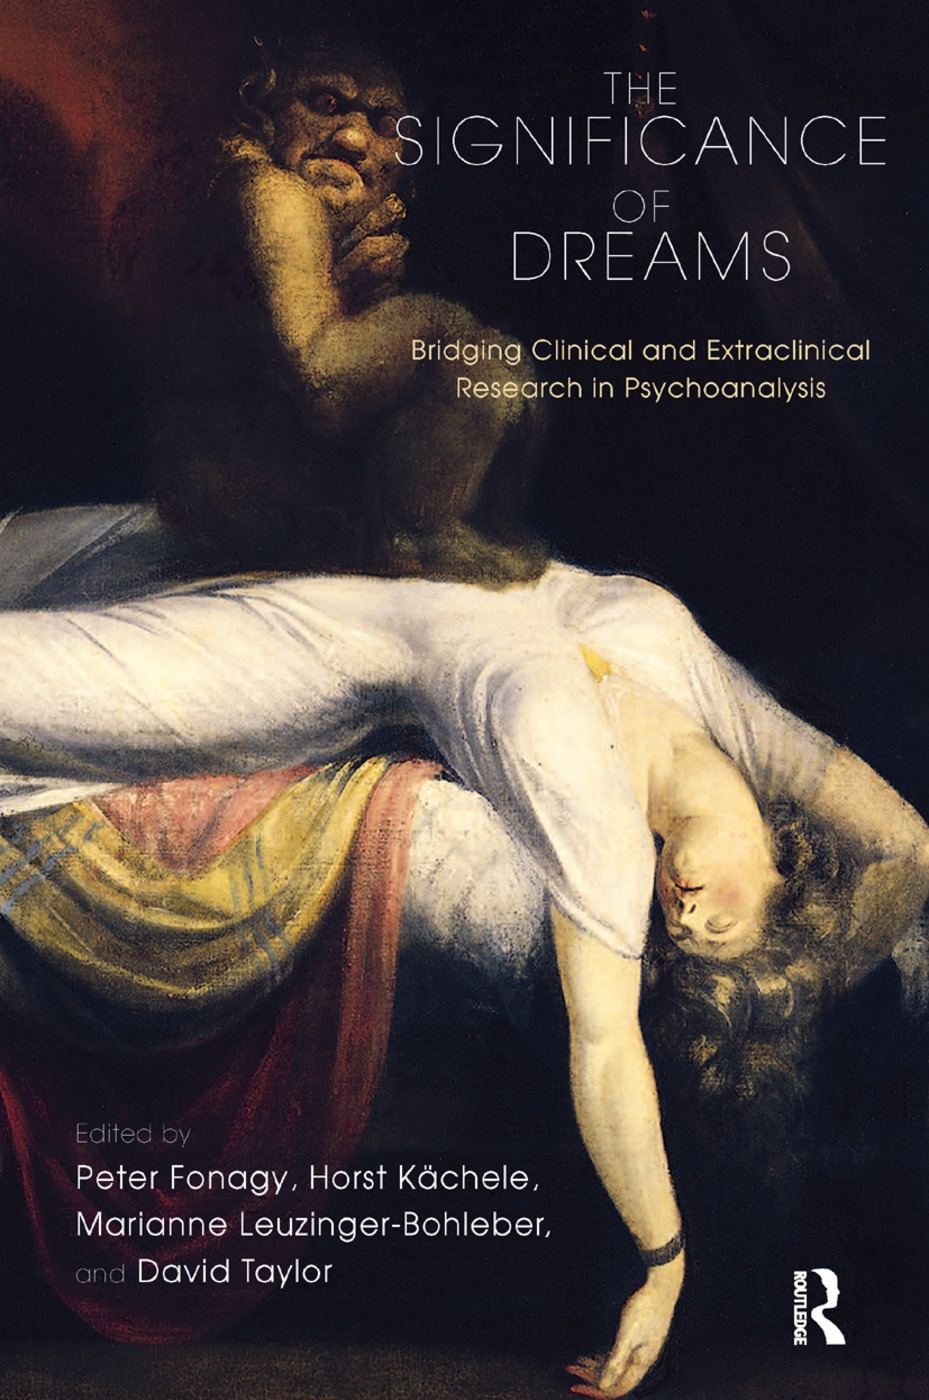 The Significance of Dreams: Bridging Clinical and Extraclinical Research in Psychonalysis